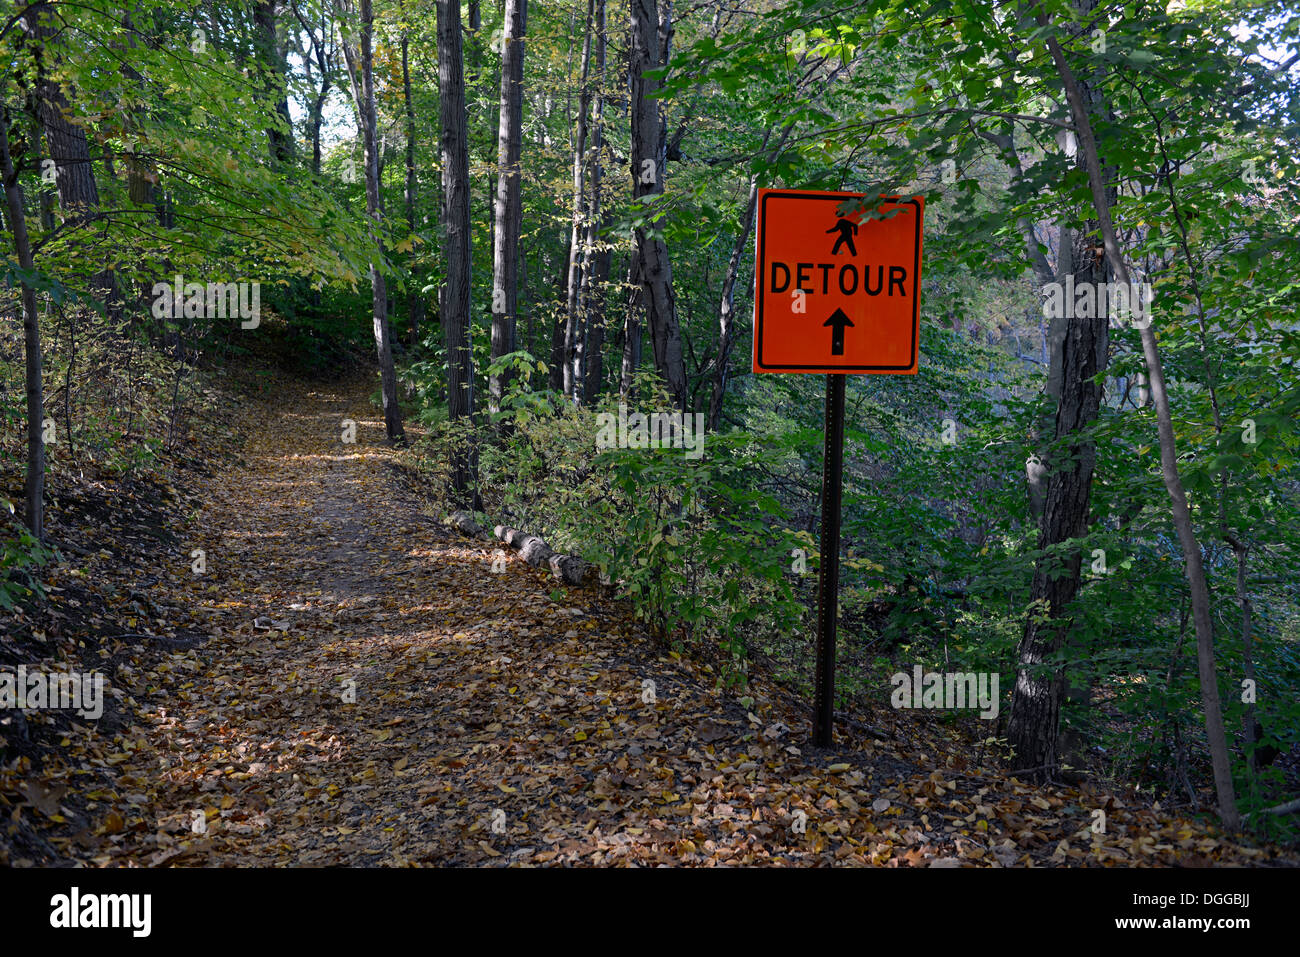 Detour sign on wooded path.  East Rock Park, New Haven, CT. Stock Photo